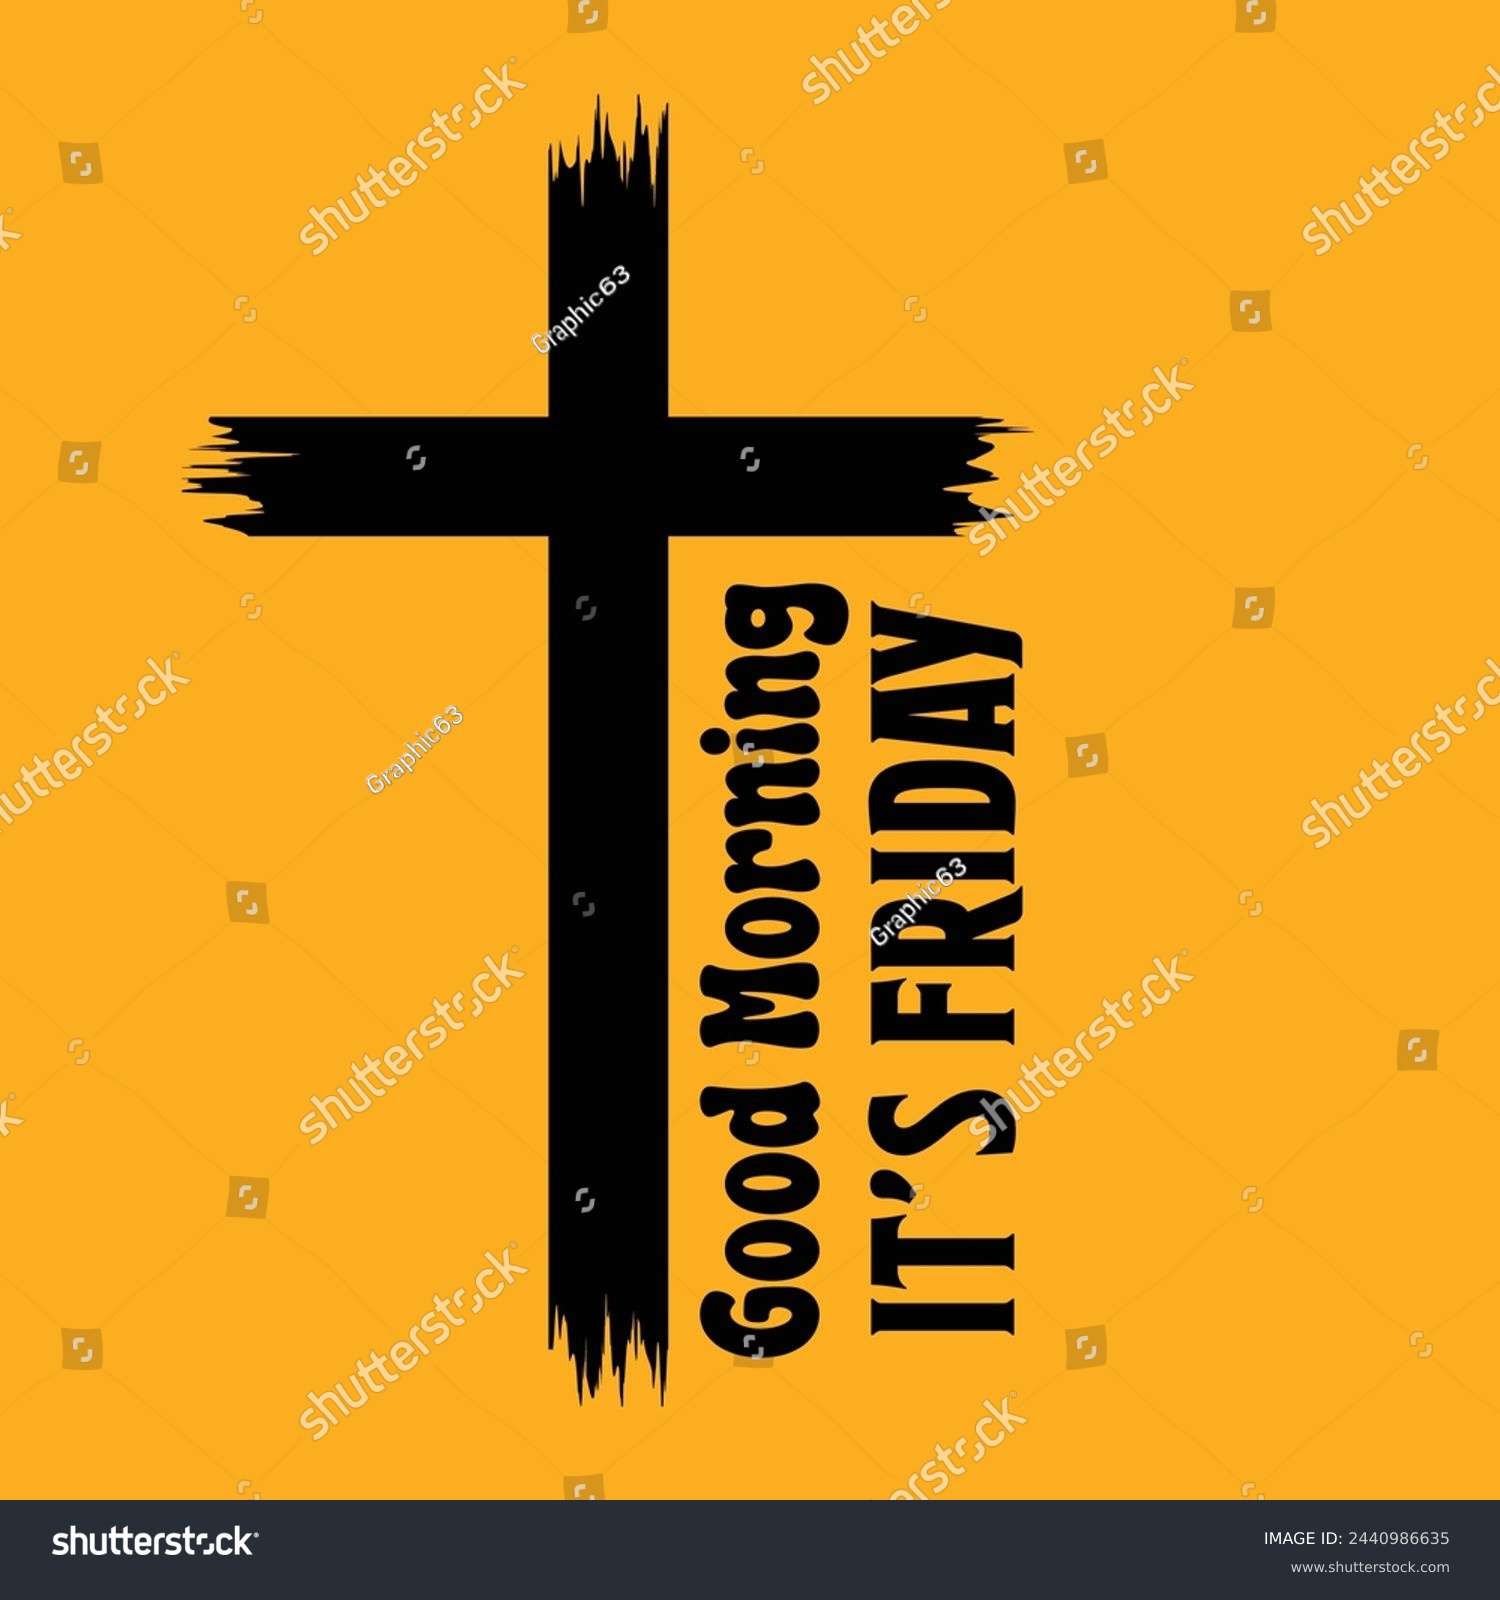 SVG of Good Friday 29 March.Good Morning.Motivational Typography Quotes Print For T Shirt, Poster, Design Vector Illustration. svg